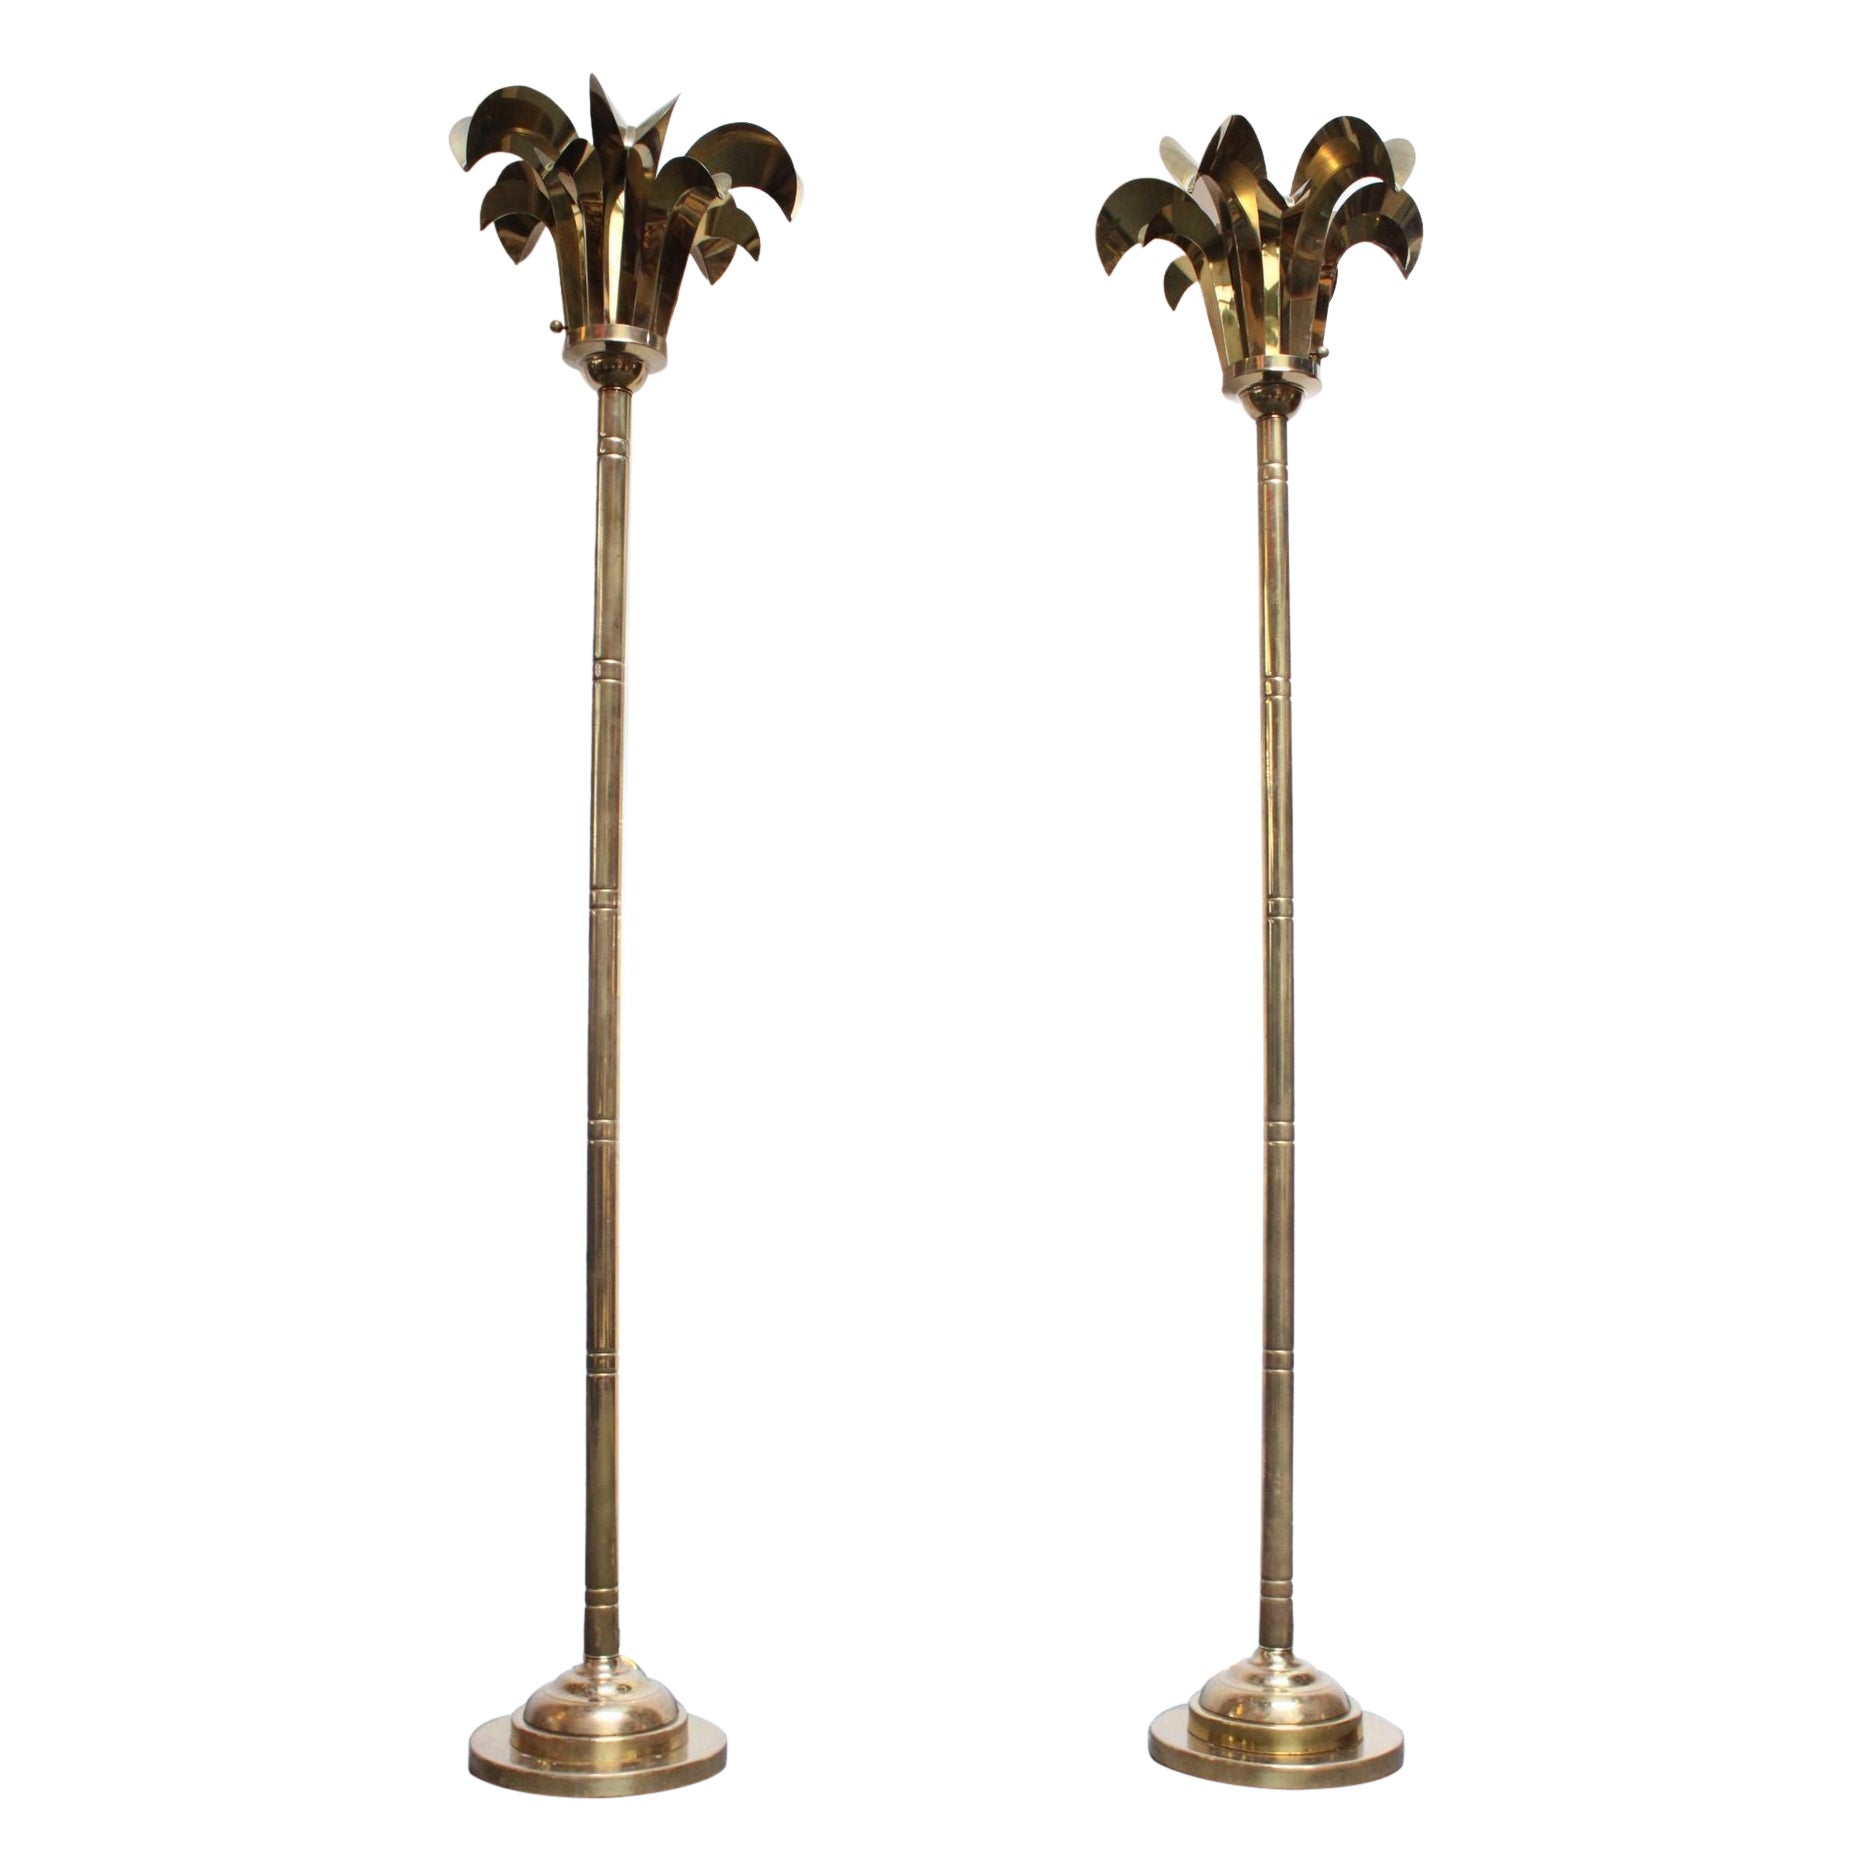 Pair of Vintage Brass "Palm Tree Frond" Floor Lamps by Hart Associates For Sale